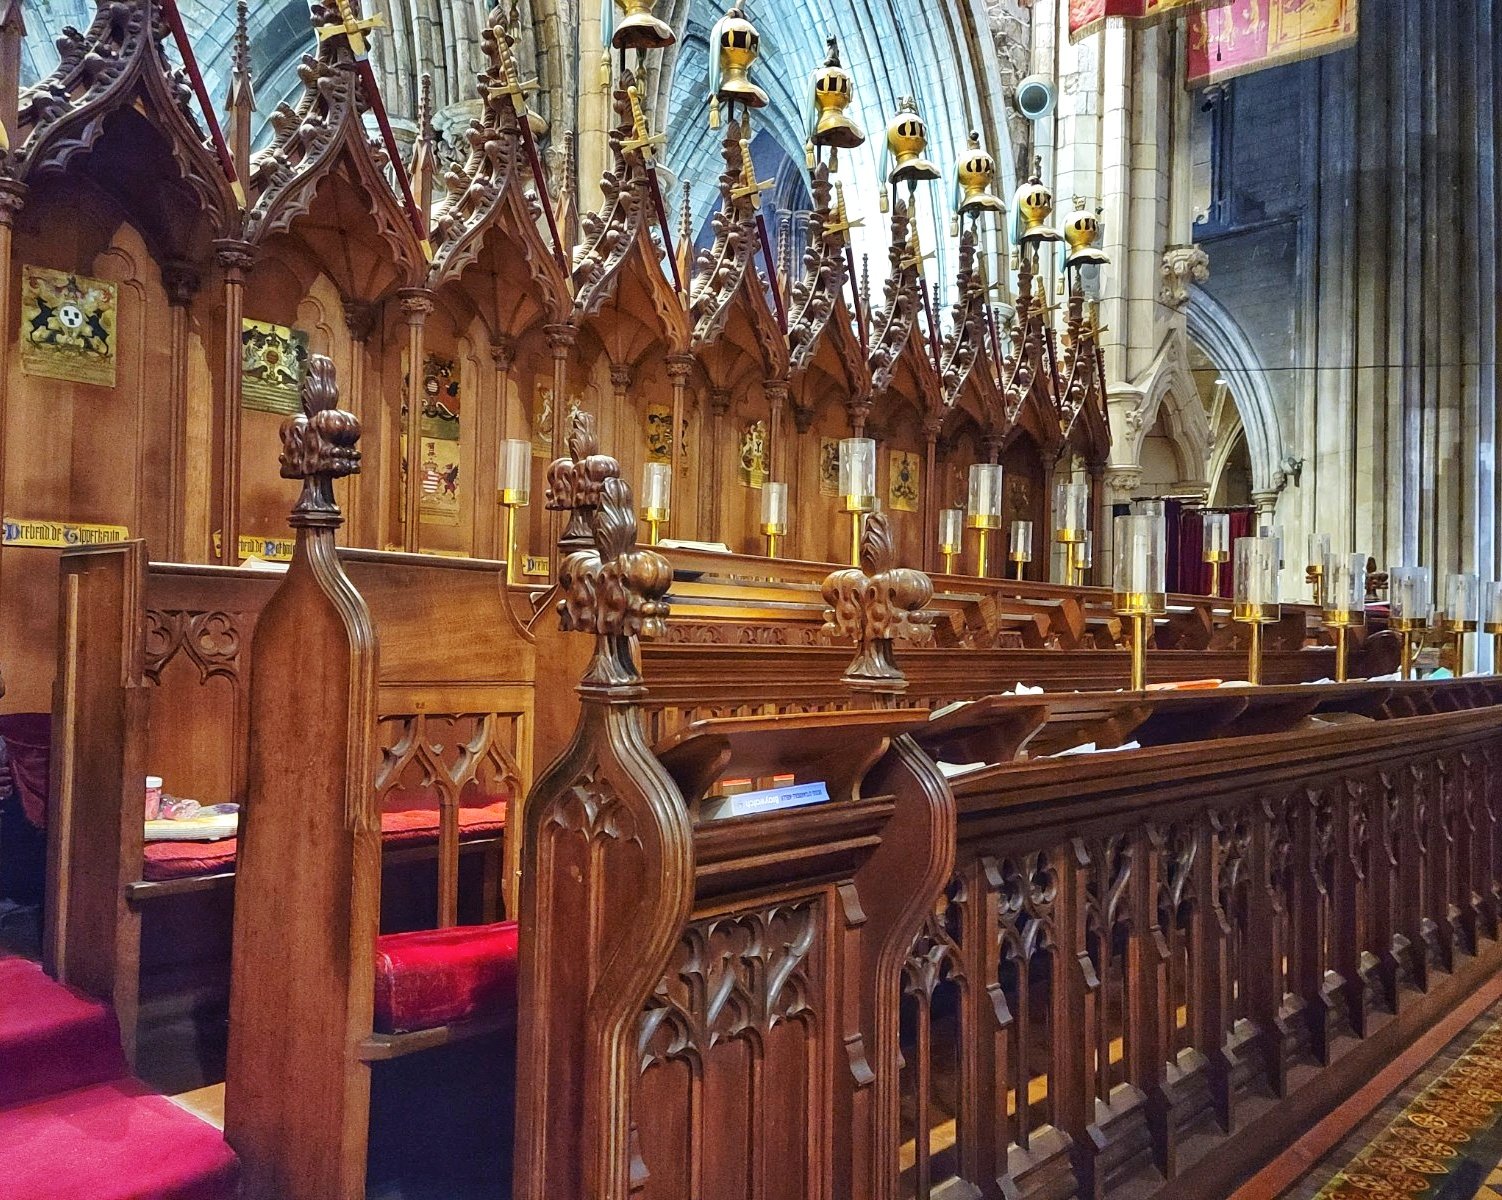 Choir Stalls inside St. Patrick's Cathedral